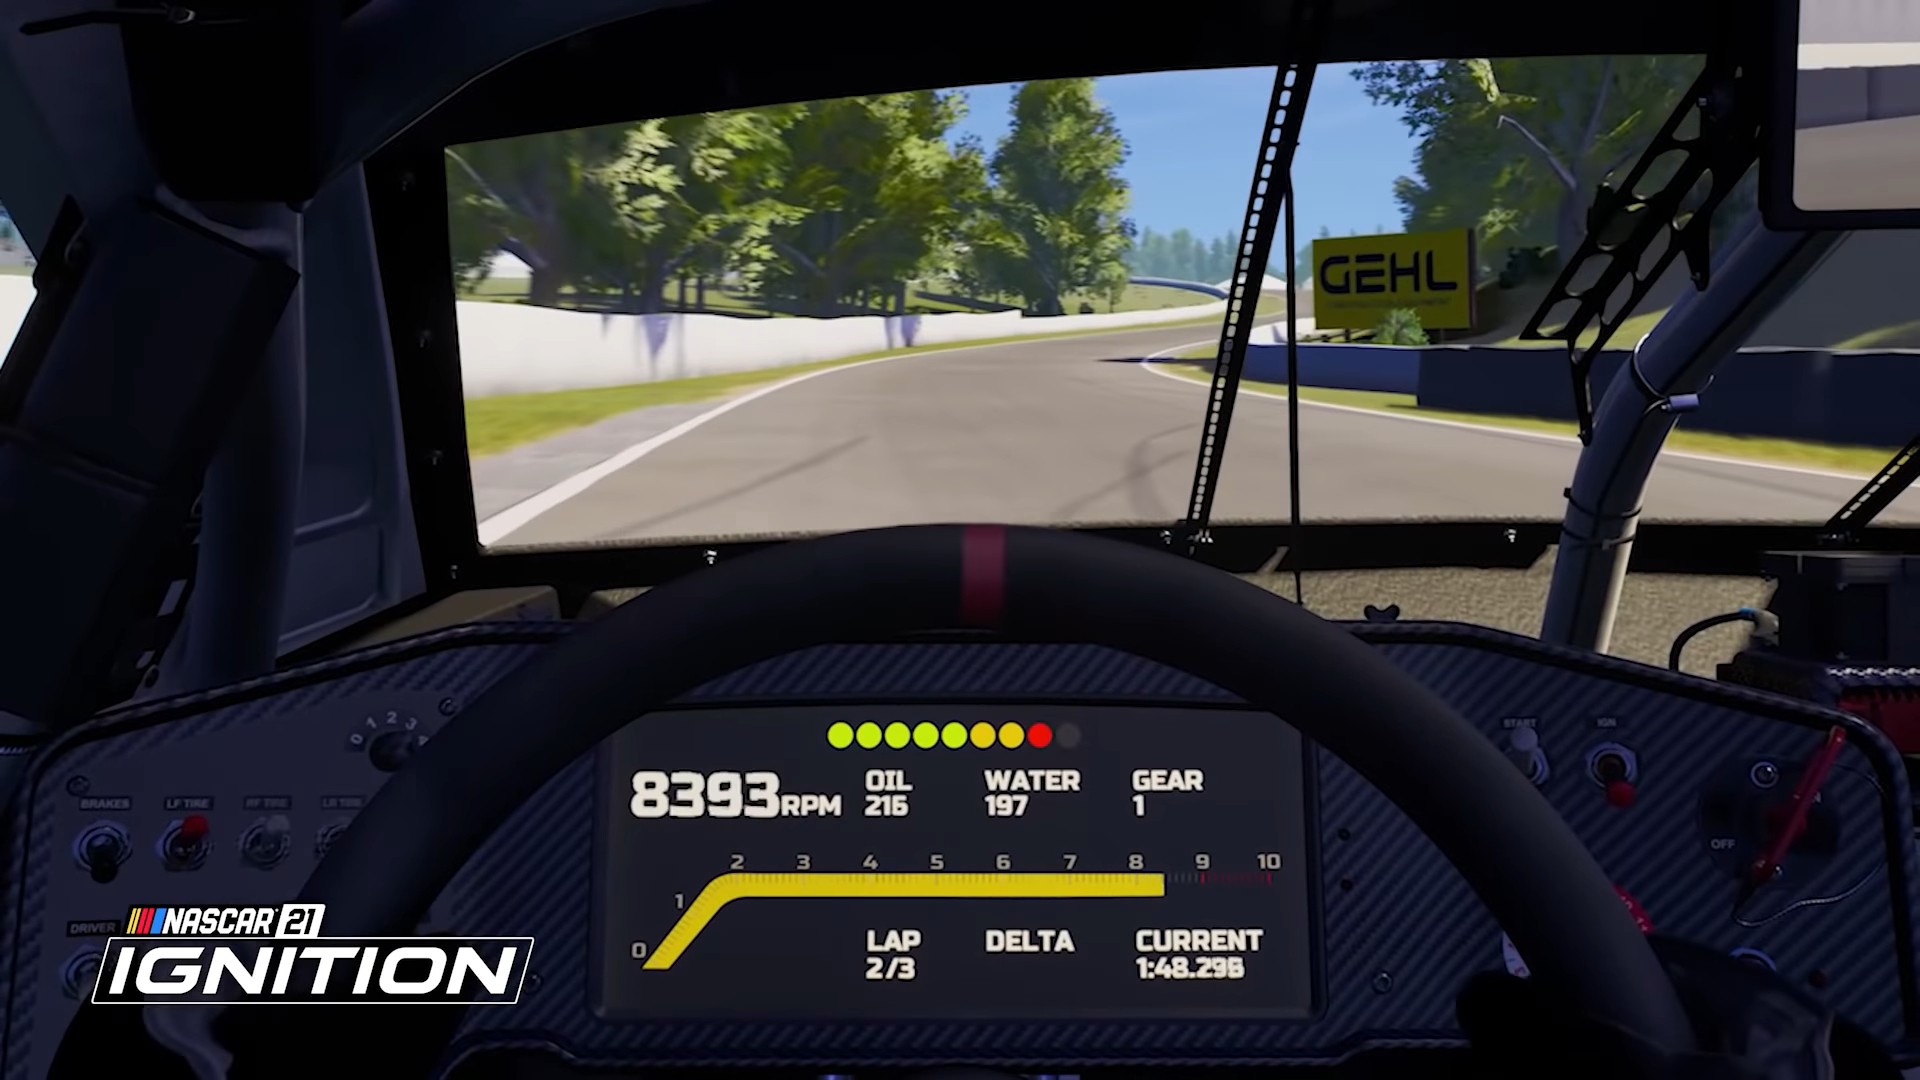 NASCAR 21: Ignition Video Drops Some Juicy Details About the Game -  autoevolution